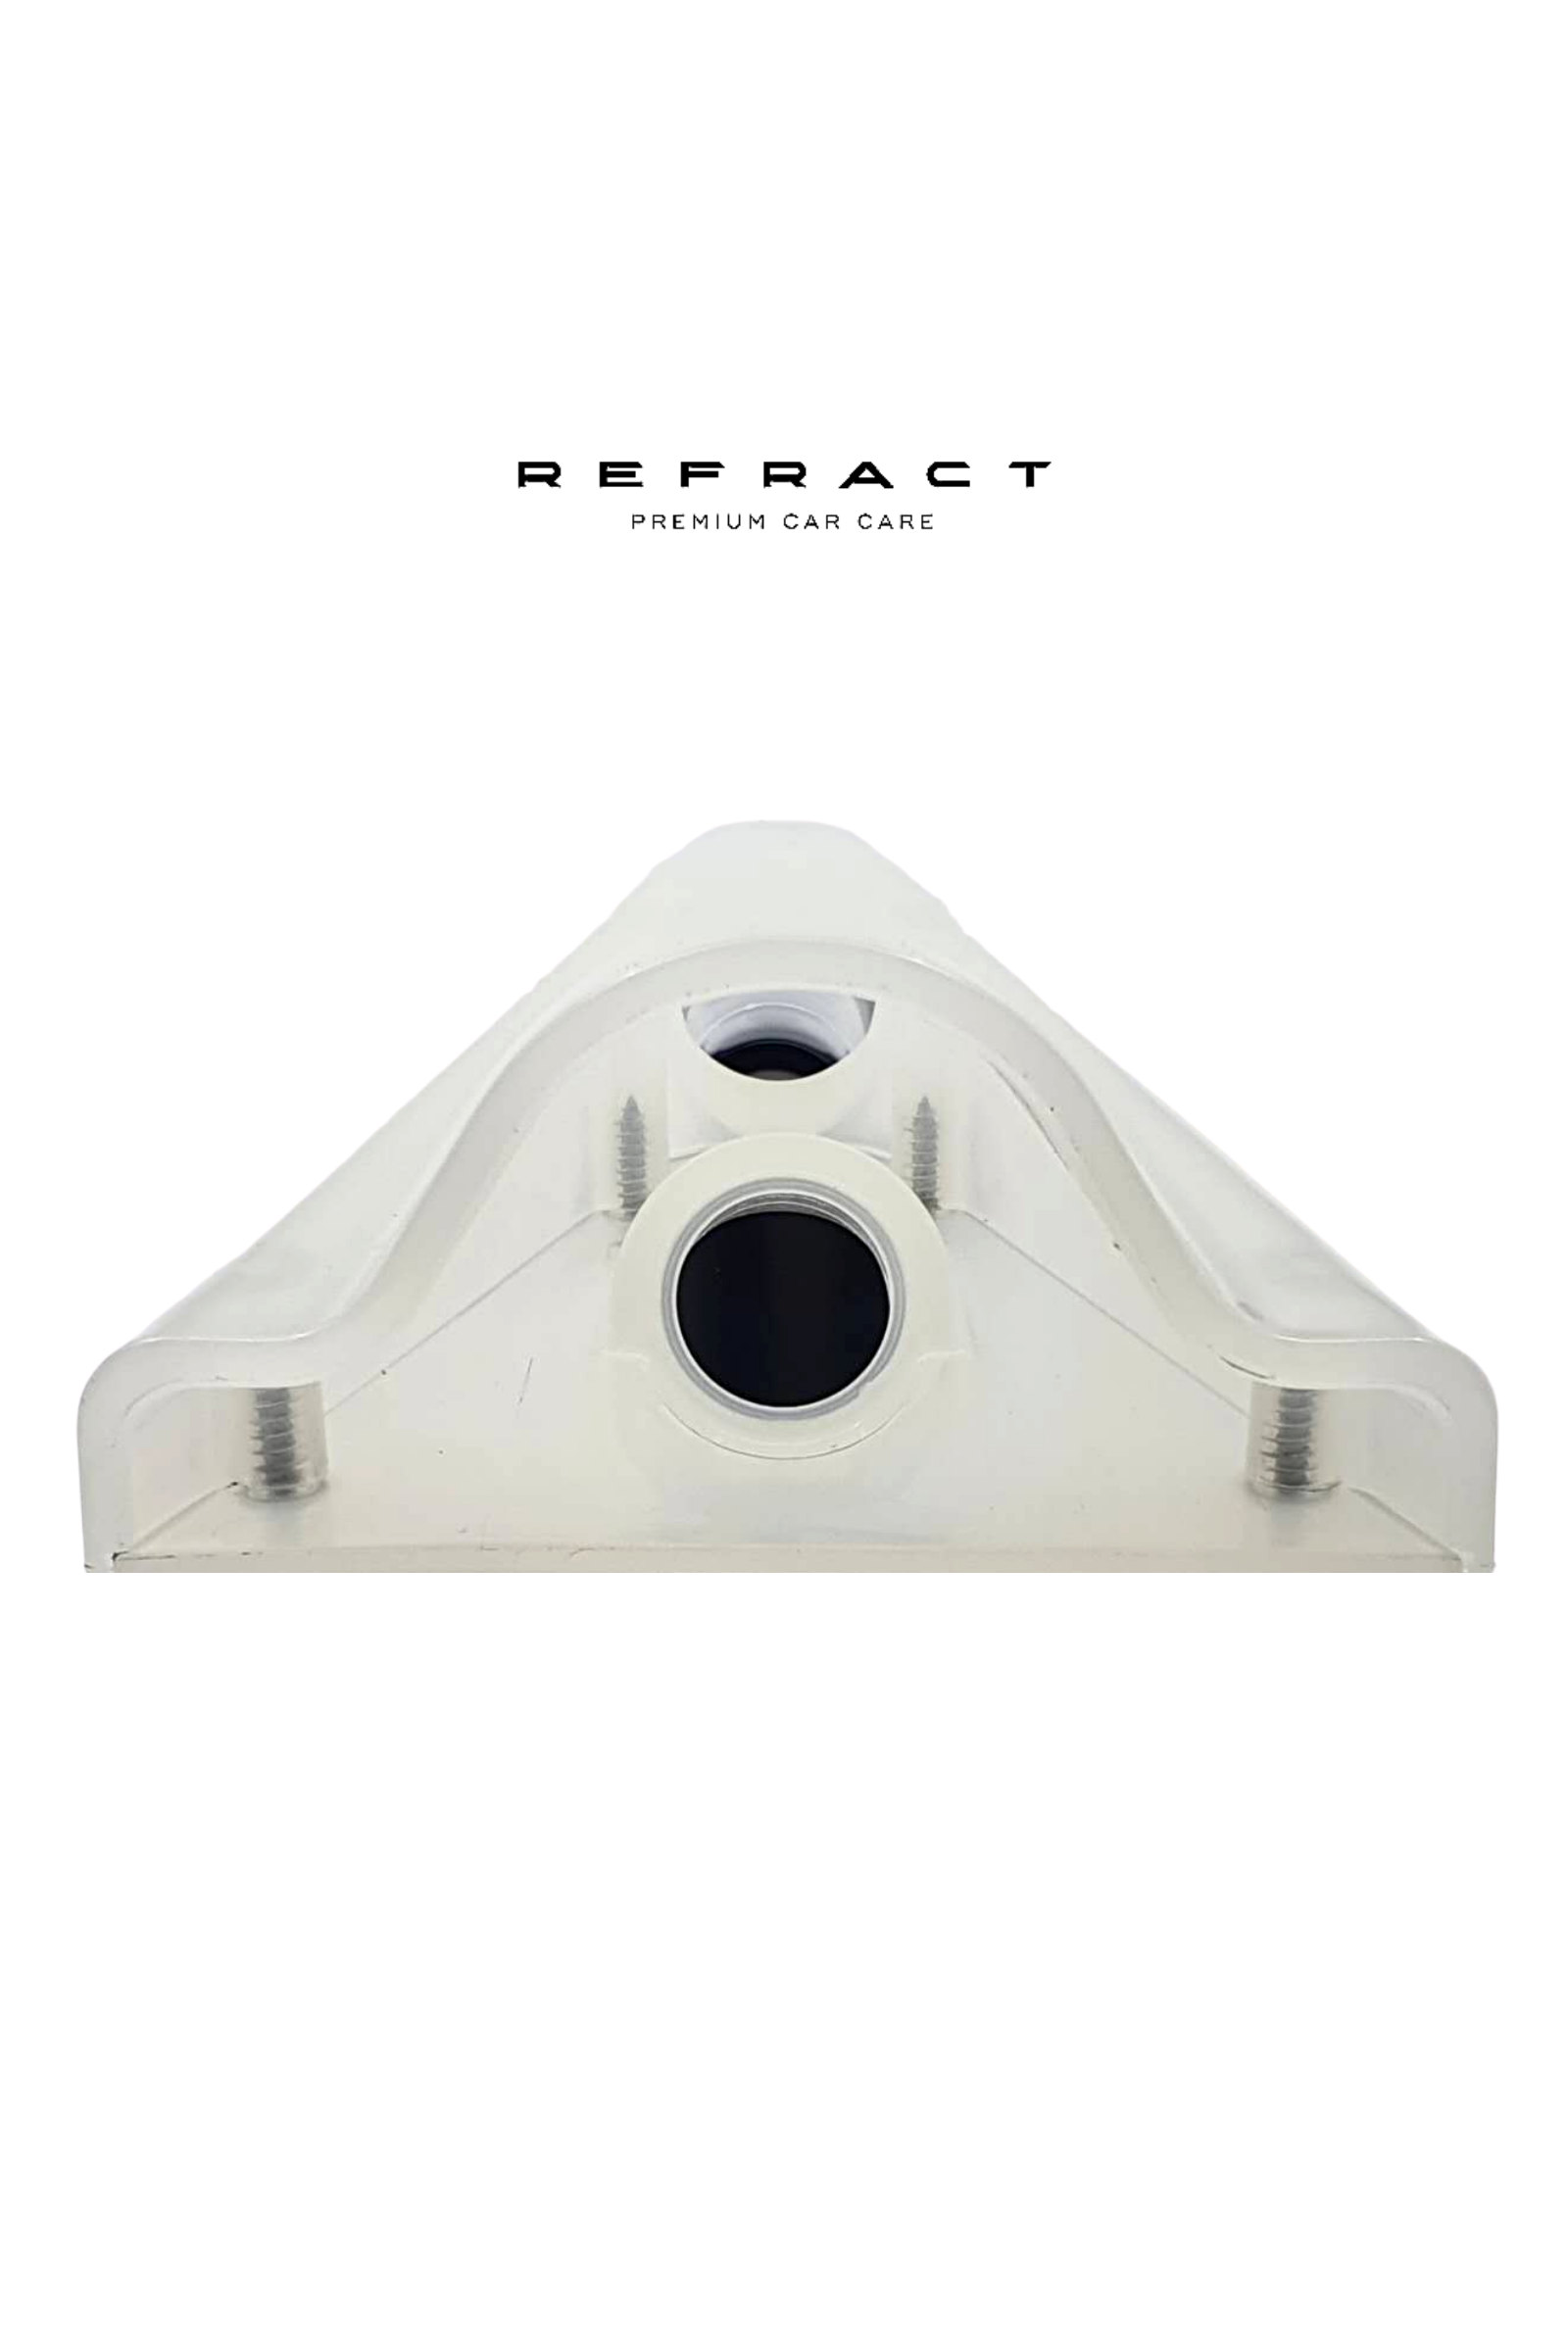 Refract Premium Car Care Products REFRACT Carpet Extraction Attachments - Suits Fury & Storm Cleaning Gun $49.95